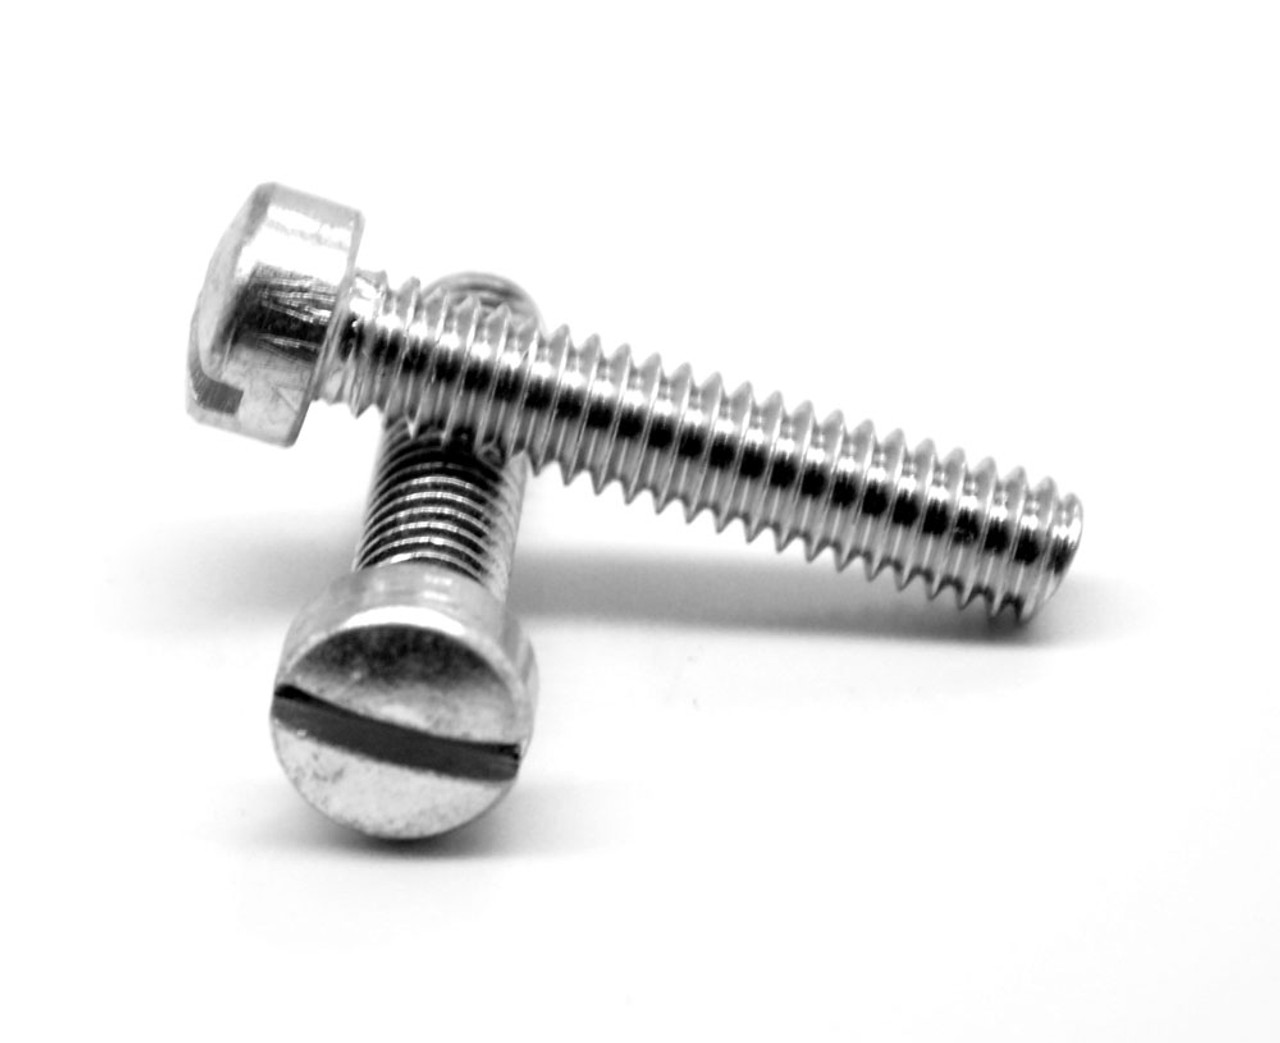 M3 x 0.50 x 5 MM Coarse Thread Machine Screw Slotted Cheese Head Low Carbon Steel Zinc Plated